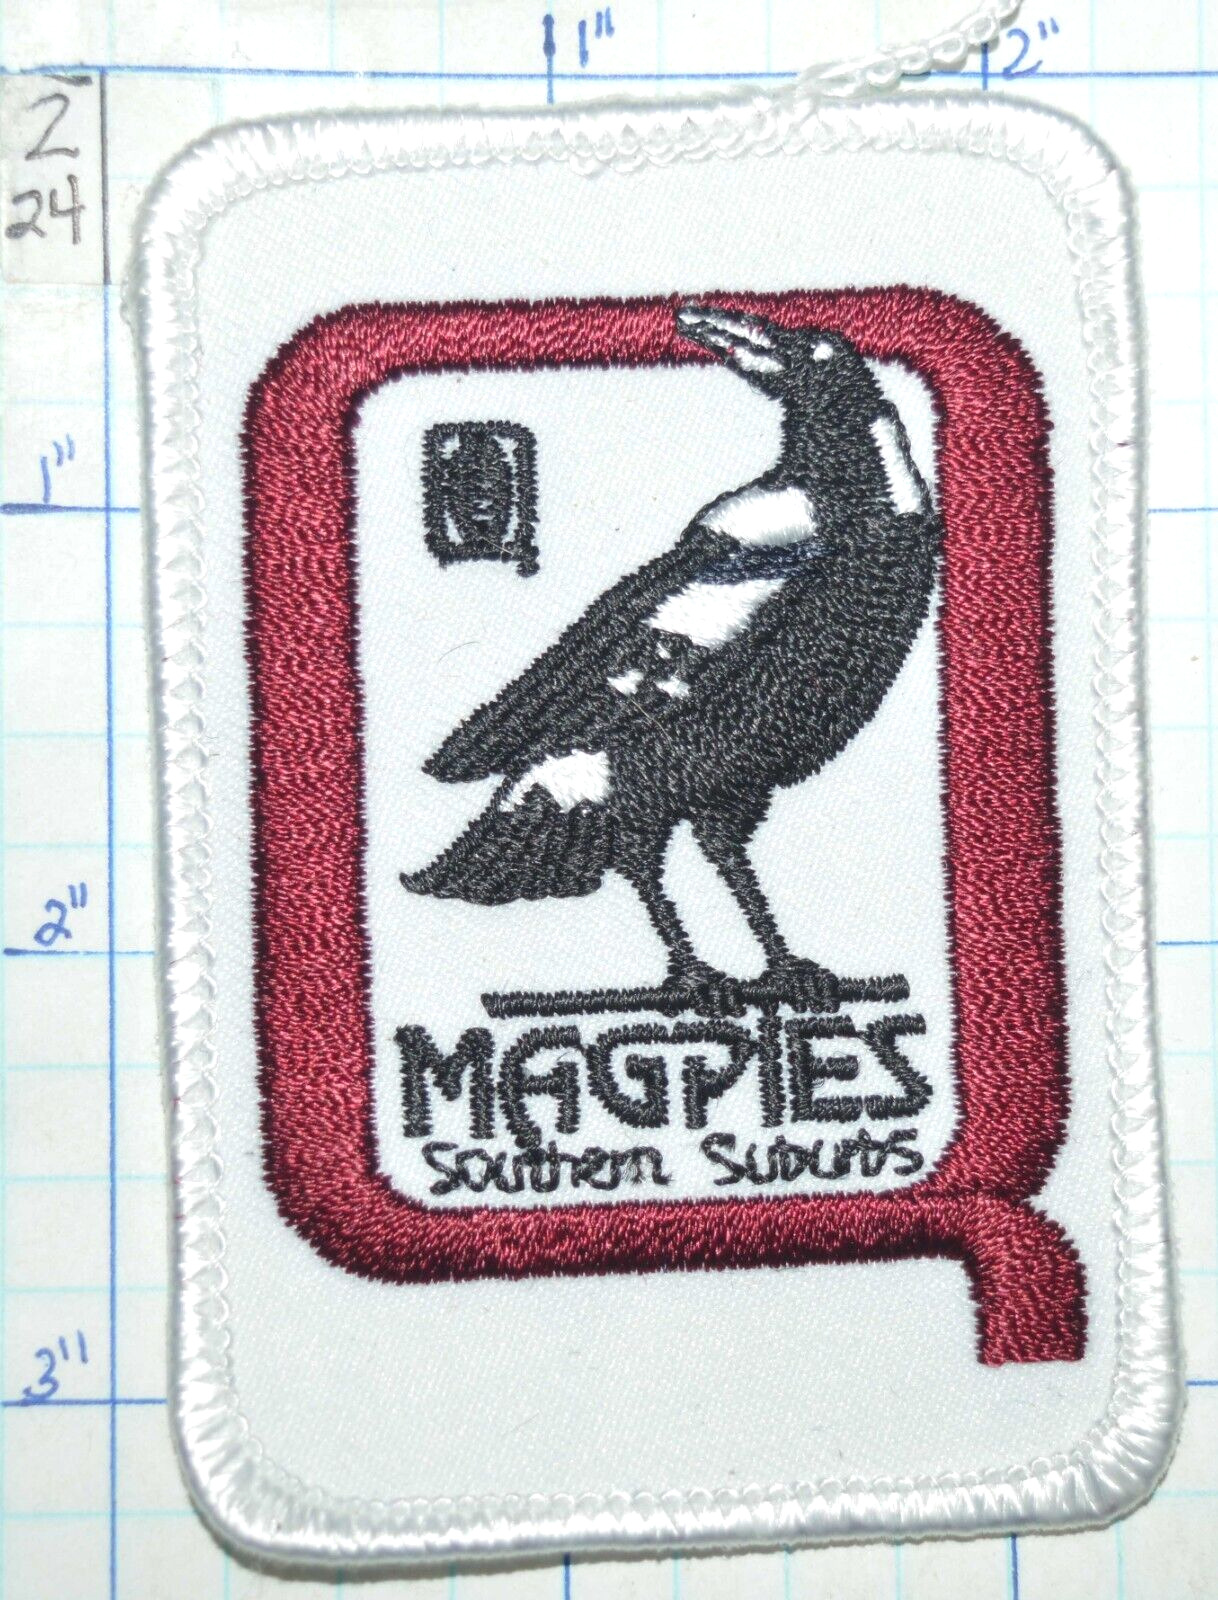 SOUTHERN SUBURBS MAGPIES RUGBY LEAGUE FOOTBALL CLUB BRISBANE AUSTRALIA PATCH